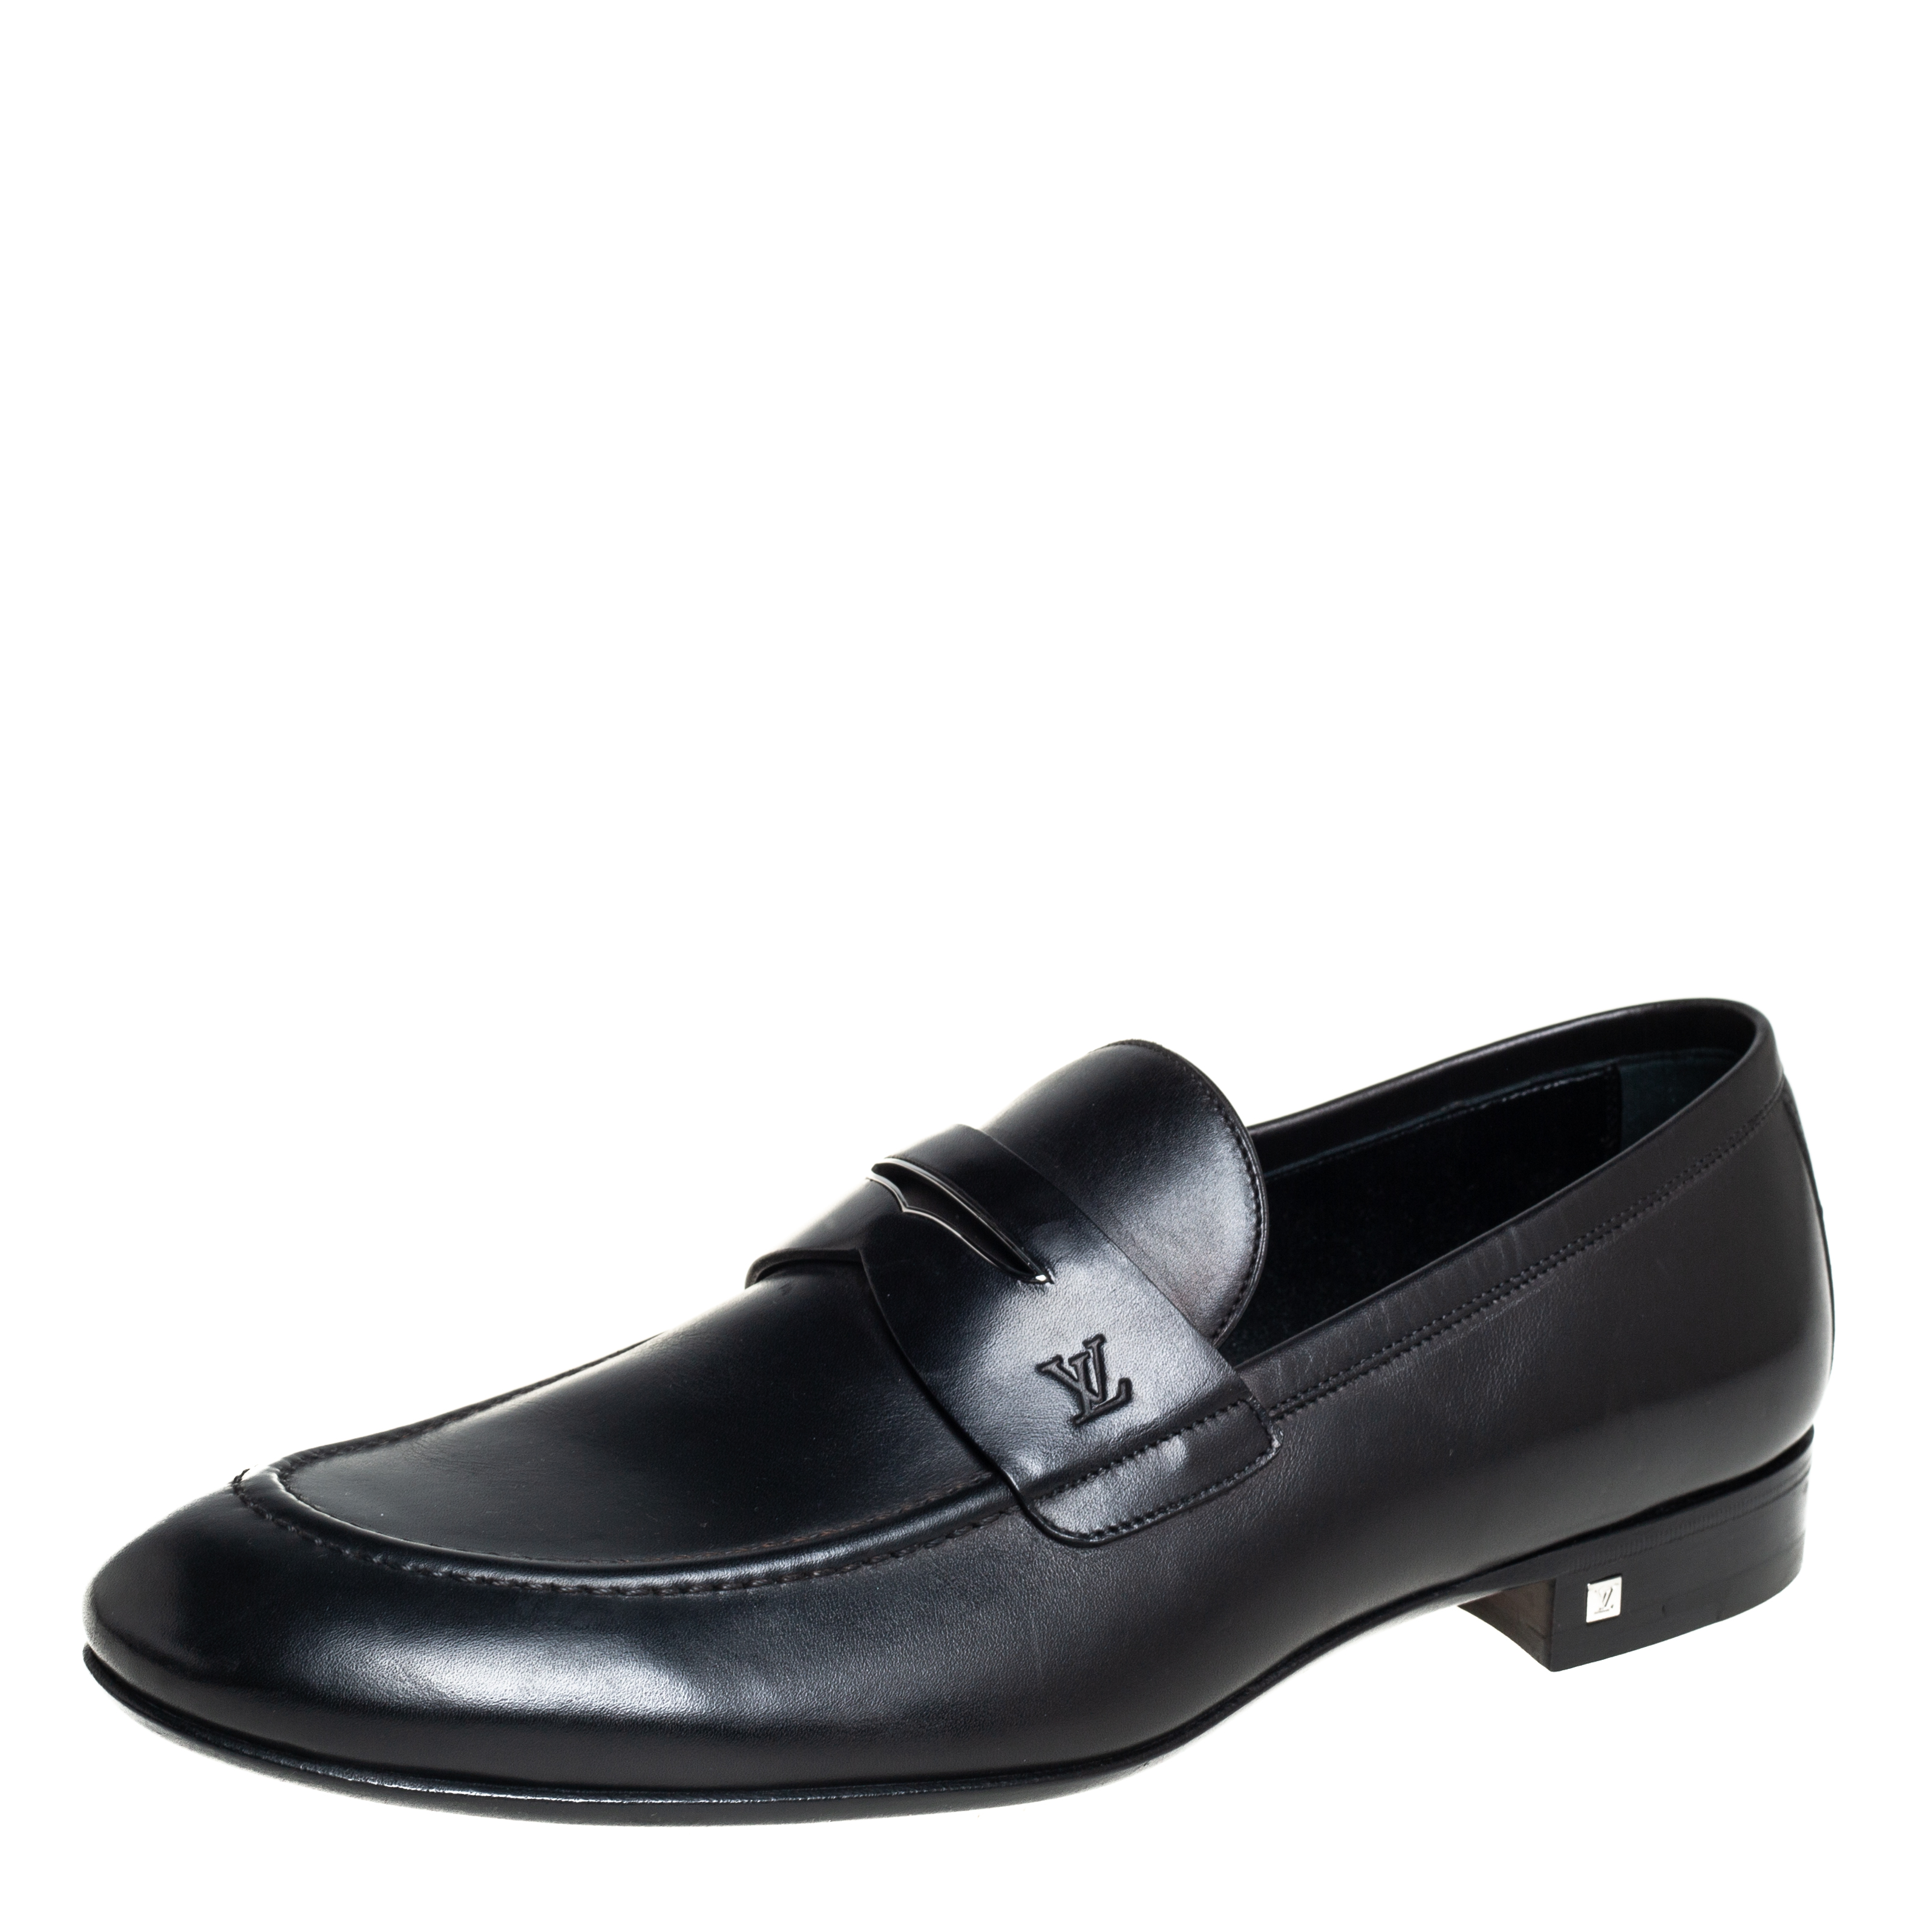 Pre-owned Louis Vuitton Black Leather Santiago Loafers Size 41.5